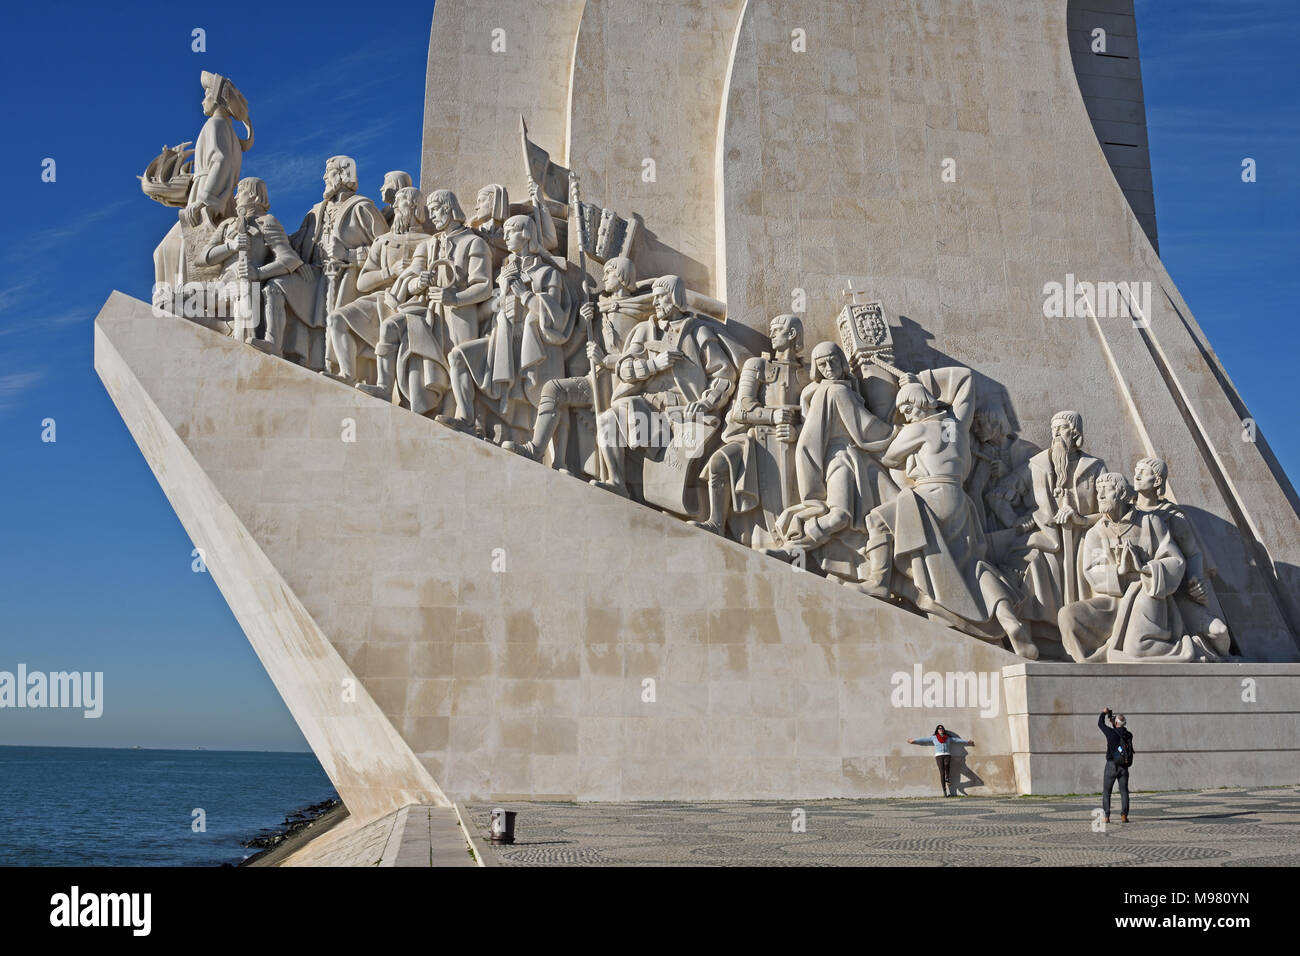 Padrão dos Descobrimentos - Monument of the Discoveries on the northern bank of the Tagus River estuary, parish of Santa Maria de Belém, Lisbon. Located along the river where ships departed to explore and trade with India and Orient, the monument celebrates the Portuguese Age of Discovery (or Age of Exploration) during the 15th and 16th centuries. Portugal ( Vasco da Gama 1460 - 1524 Portuguese explorer and the first European to reach India by sea.) Stock Photo